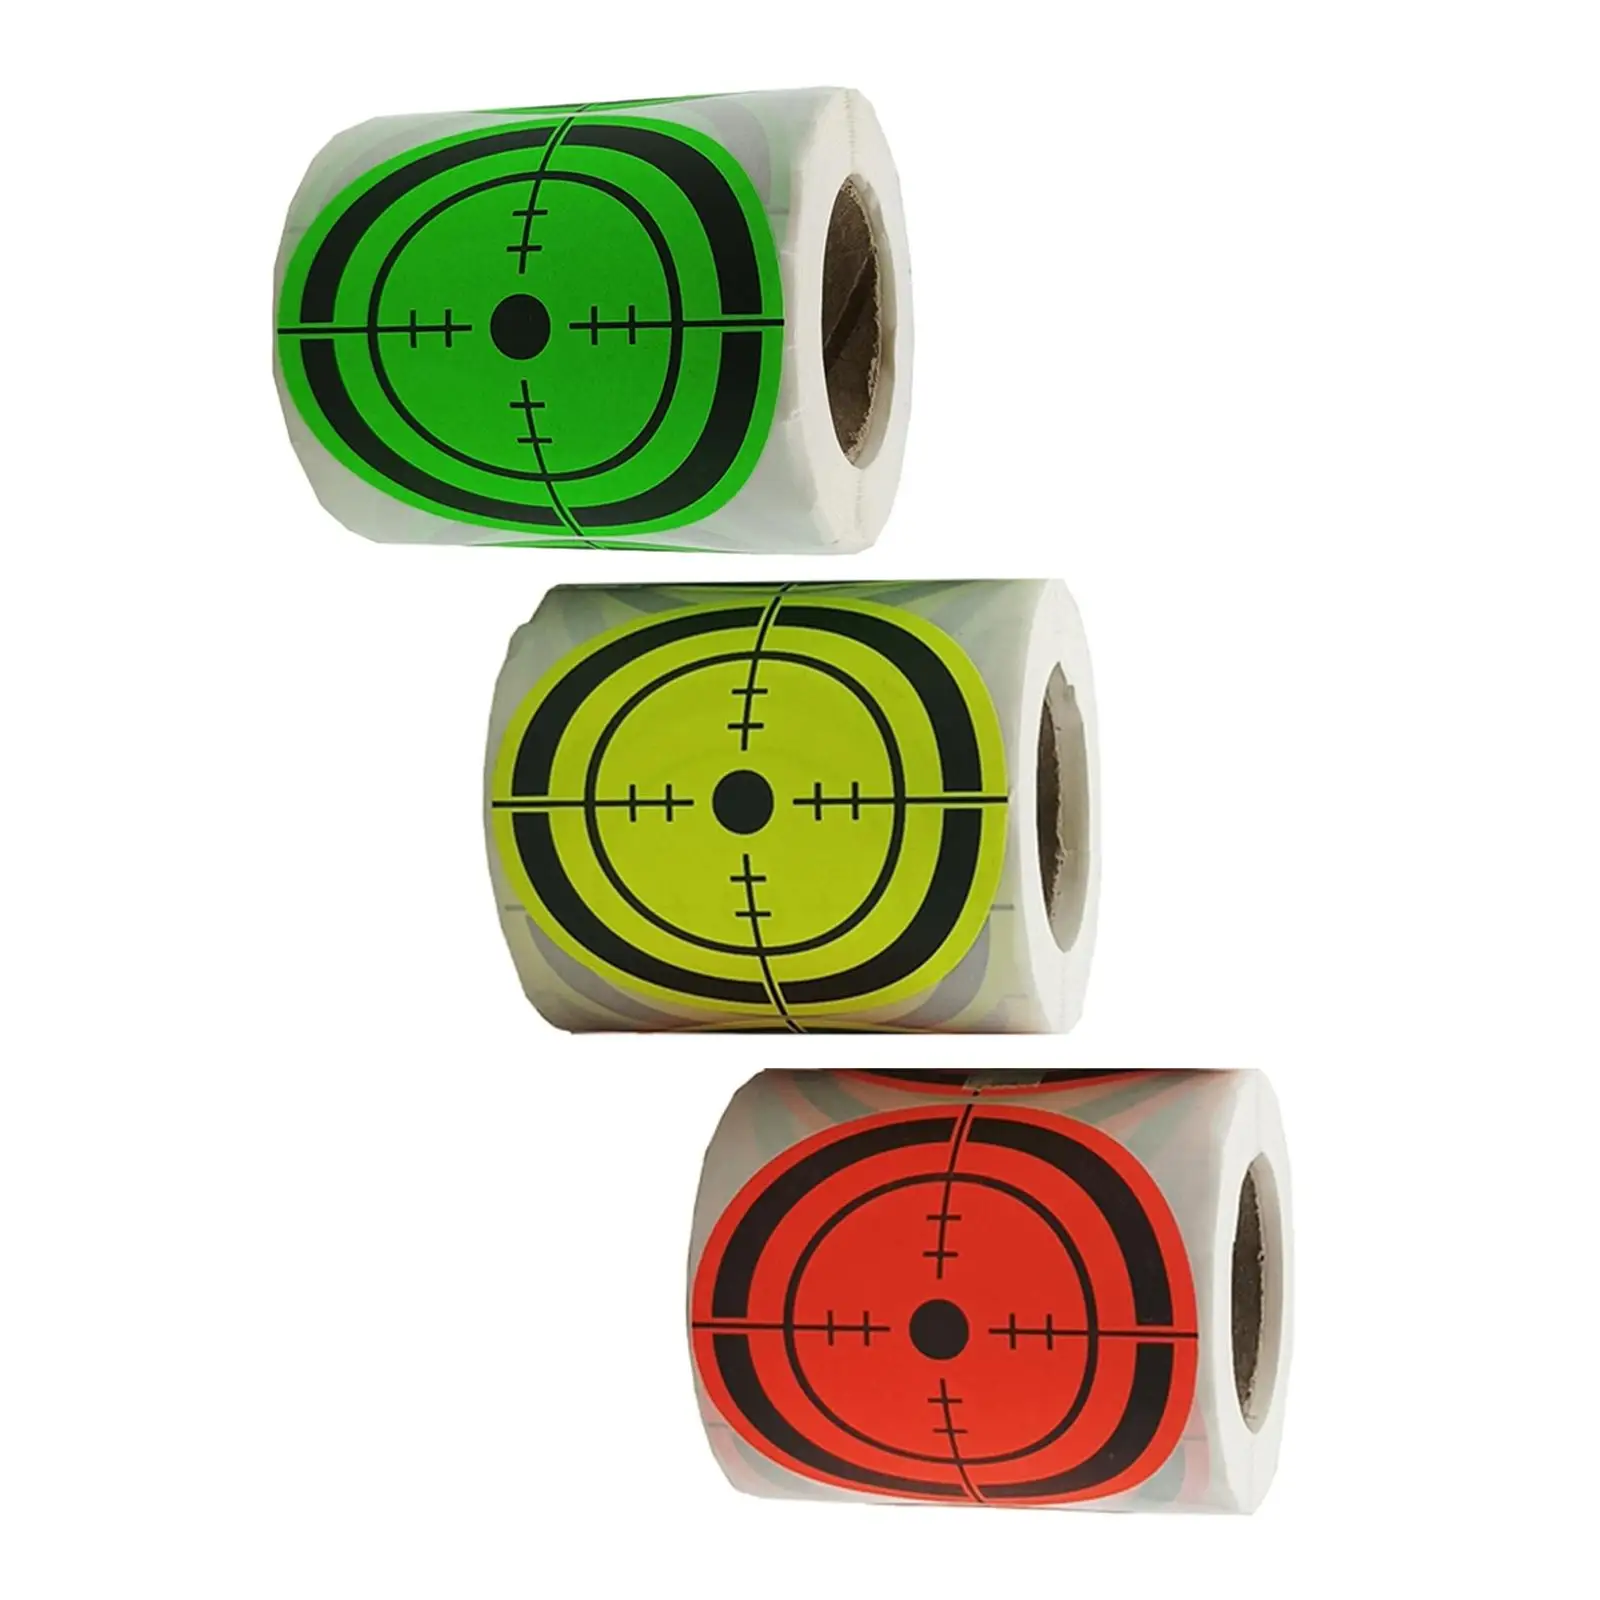 Round Shooting Targets Range Paster Paper Target Hunting Targets Accessories Self Adhesive Sticker for Archery